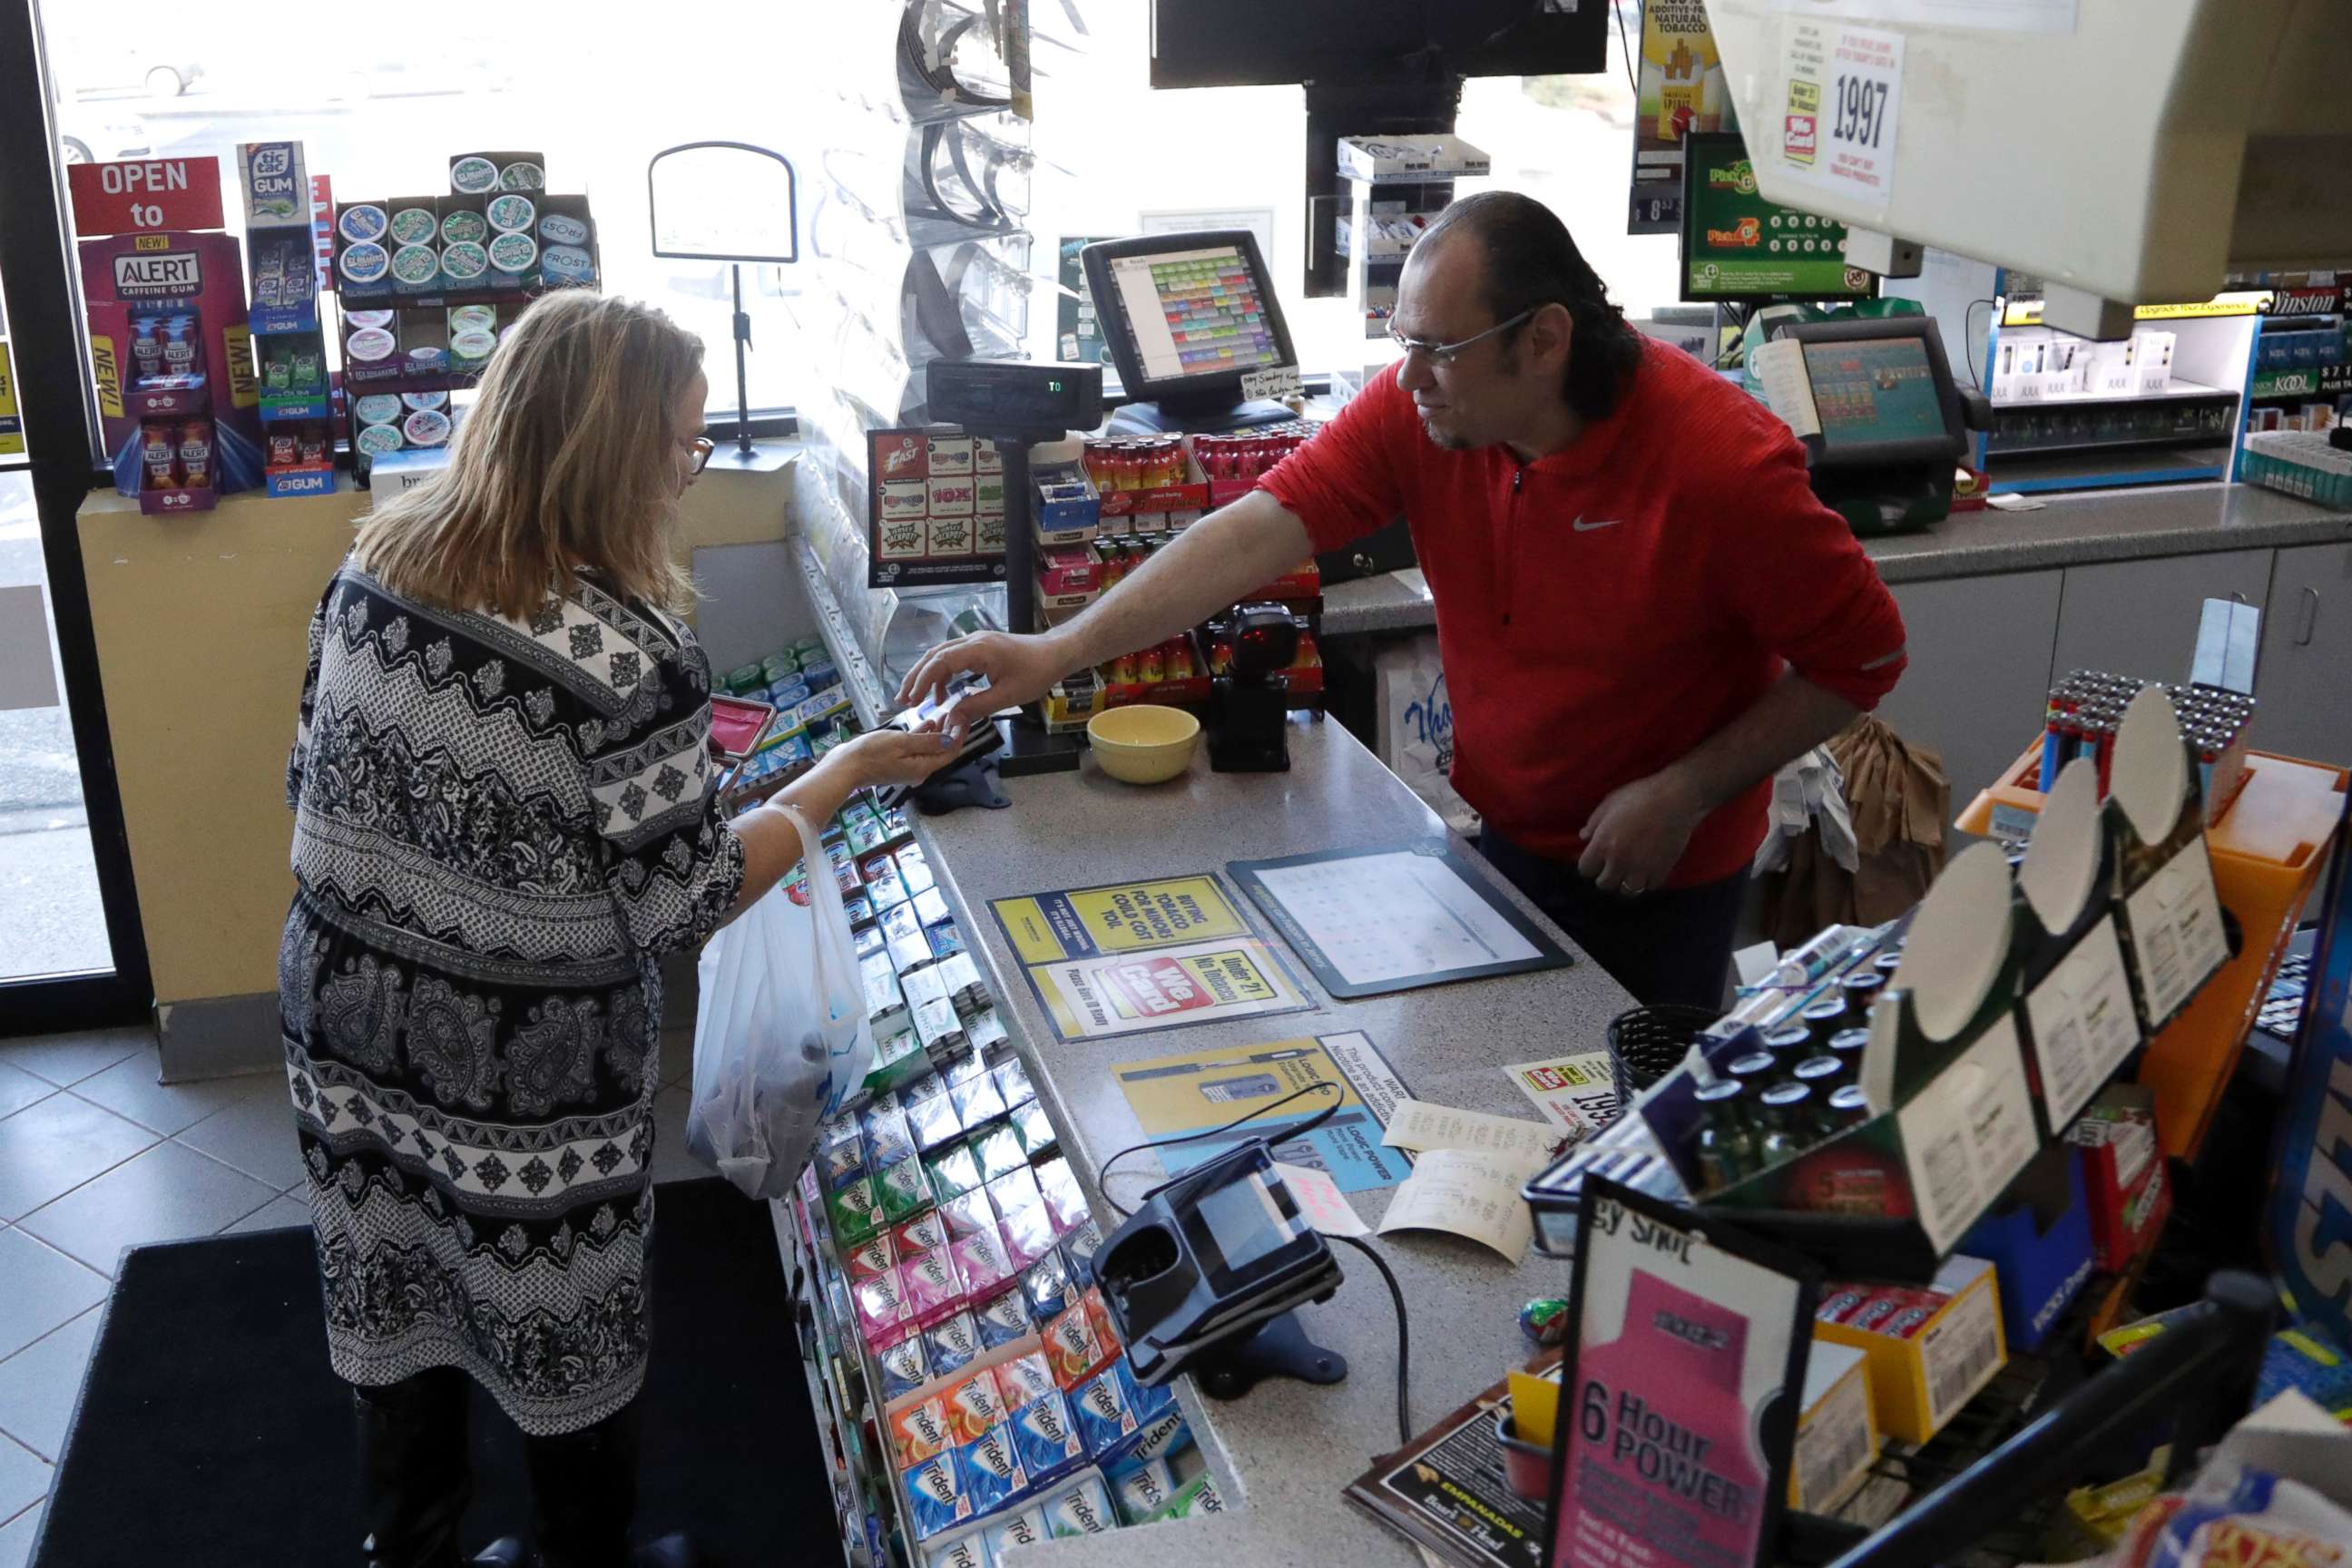 PHOTO: A cashier checks out a customer at a Lukoil service station where the winning ticket for the Mega Millions lottery drawing was sold, March 31, 2018, in Riverdale, N.J. 